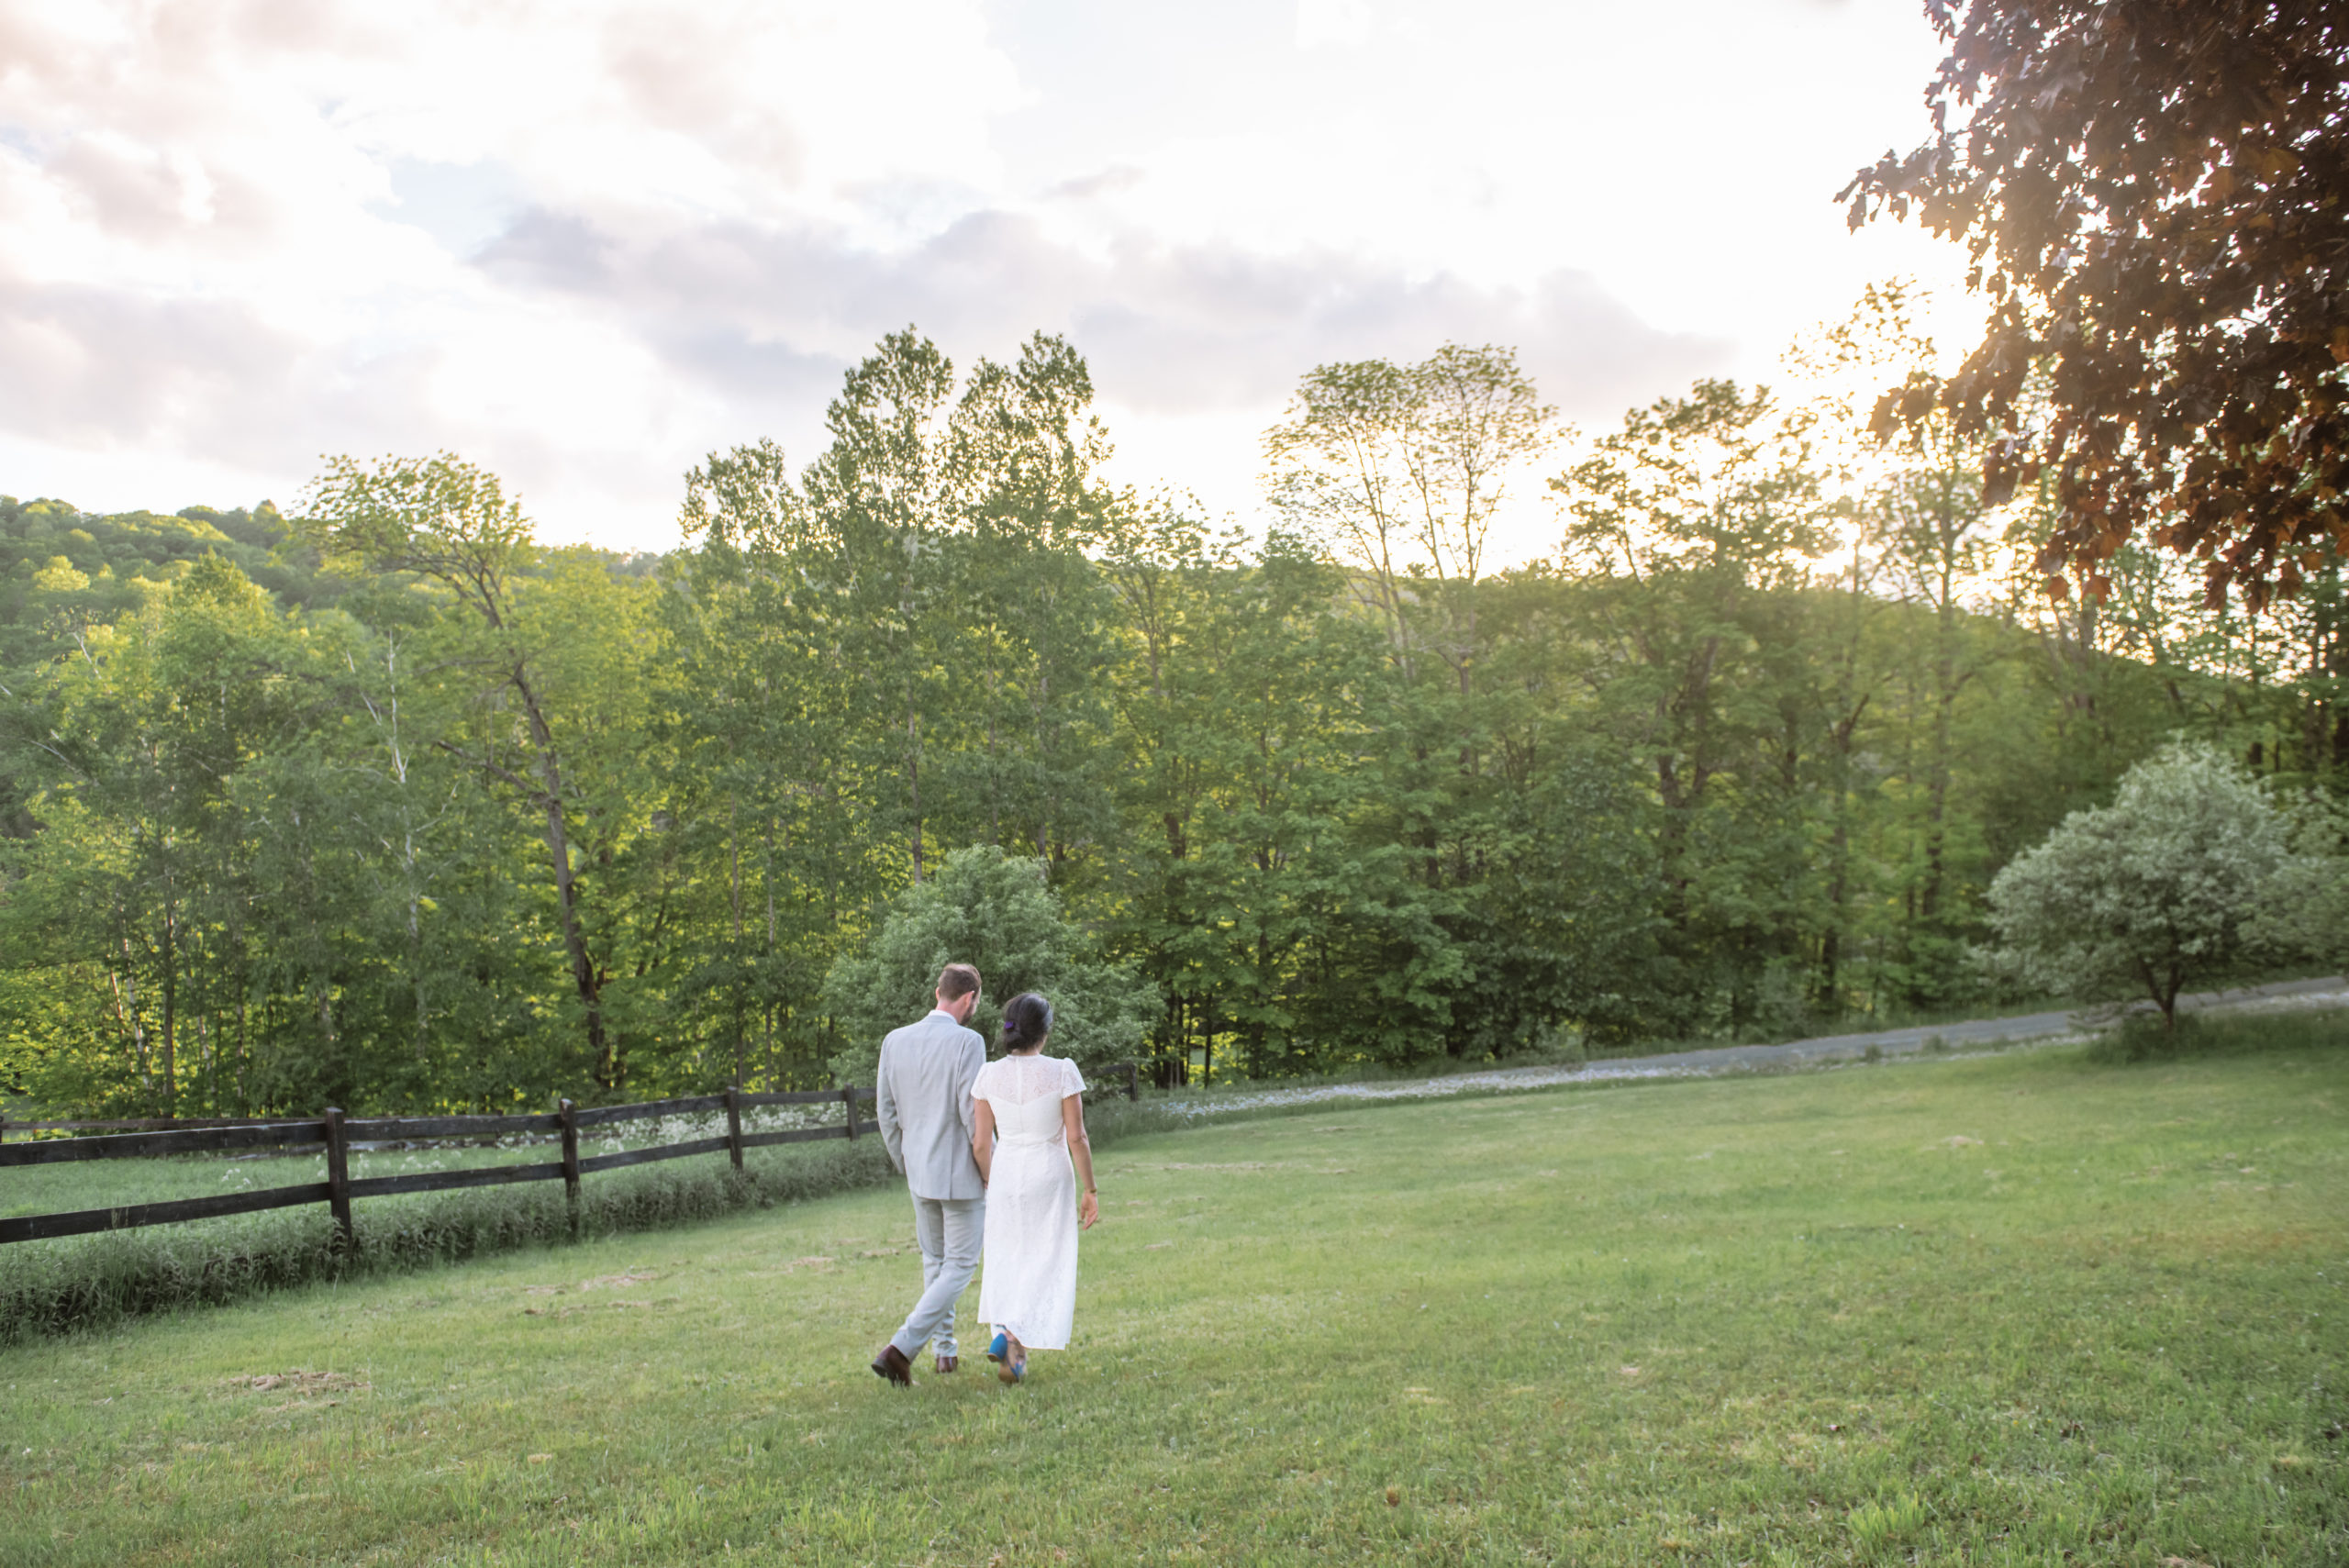 Bride and groom walking away from the camera holding hands. They are walking in a field in front of a dark wooden fence encasing white flowers. The setting sun is shining light through the trees and over the mountain in the background.